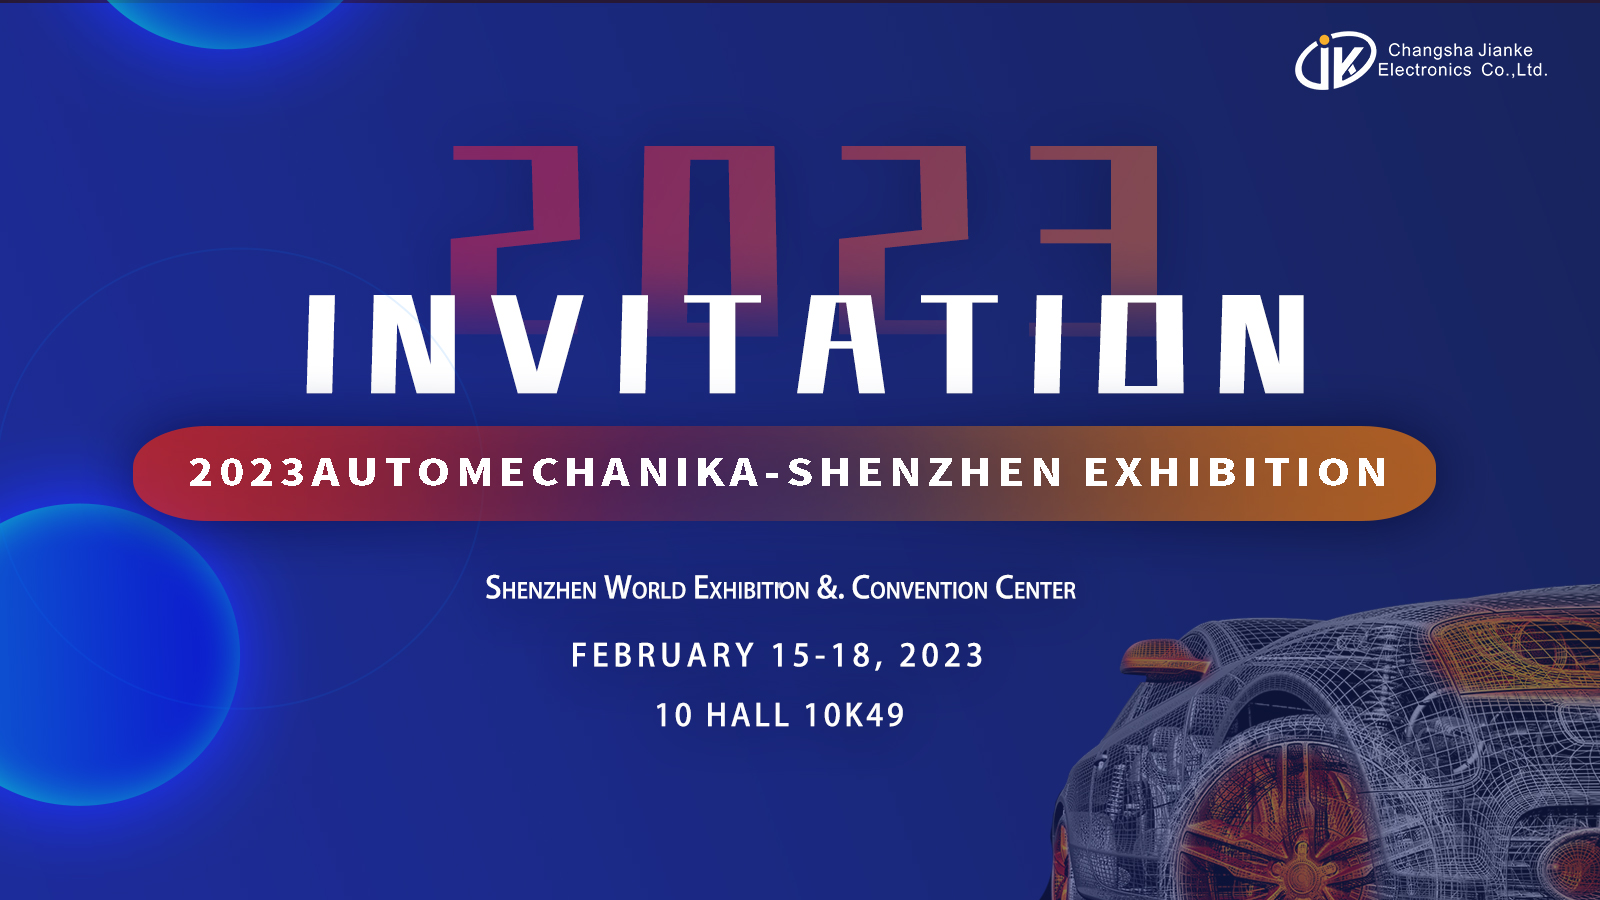 From February 15 to 18th., 2023, Shenzhen International Convention and Exhibition Center, hope to see you there!